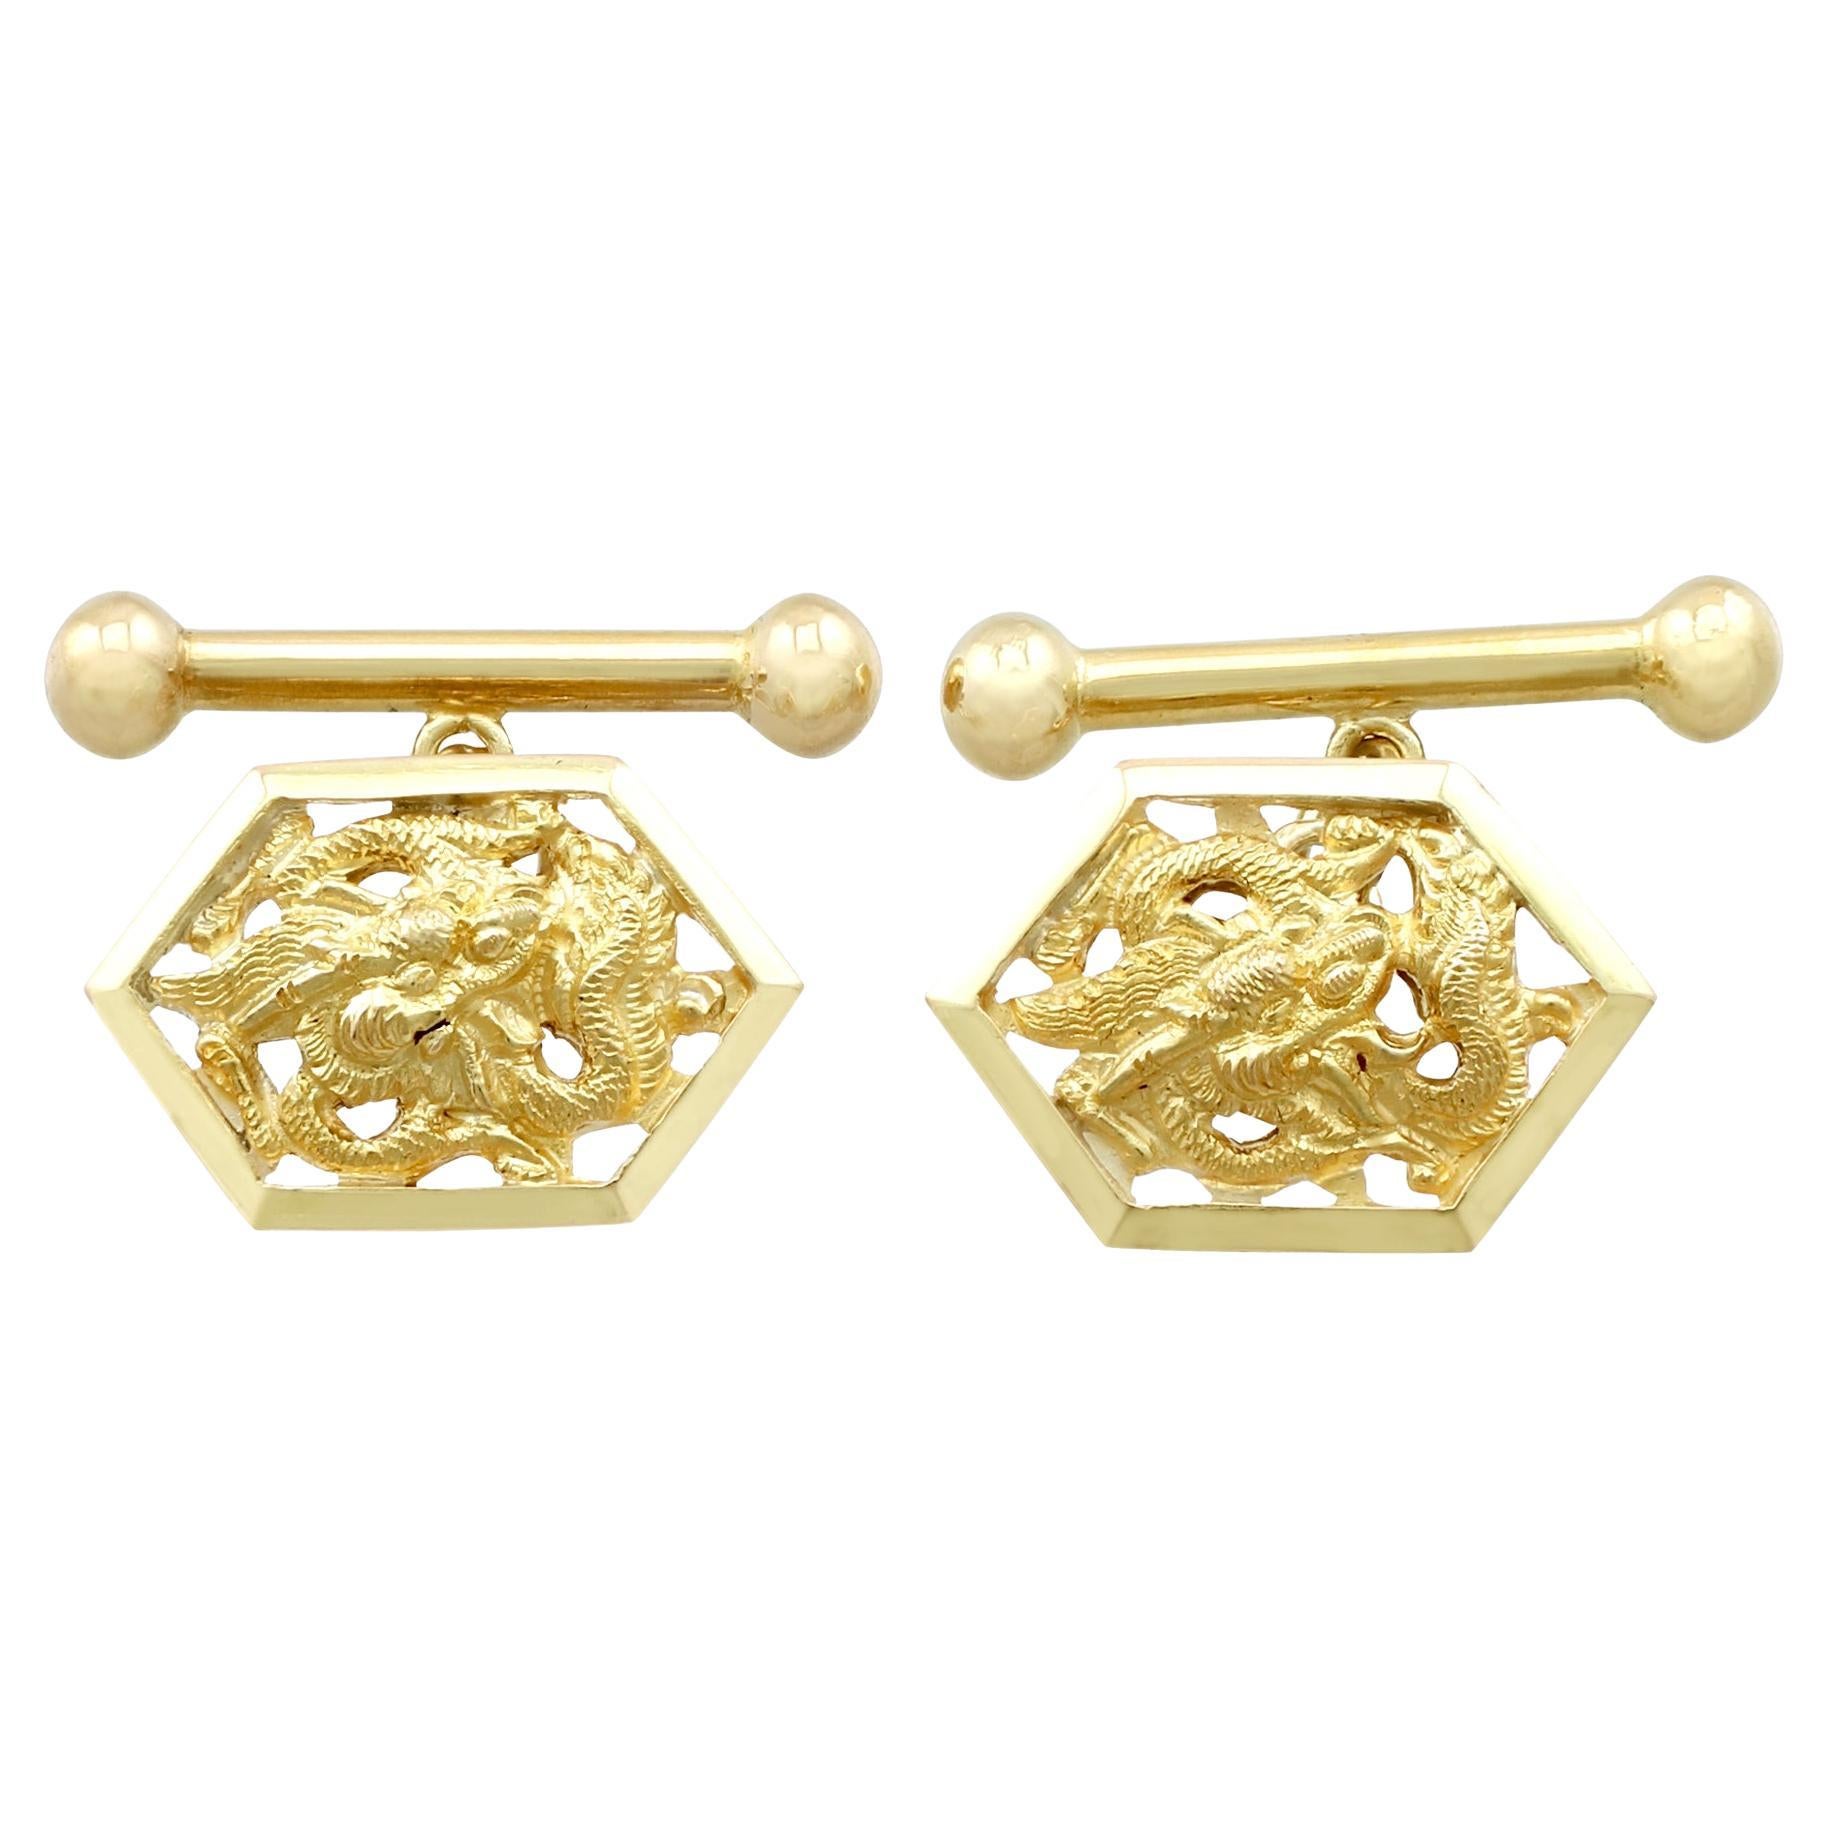 1900s Antique Chinese Yellow Gold Dragon Cufflinks For Sale